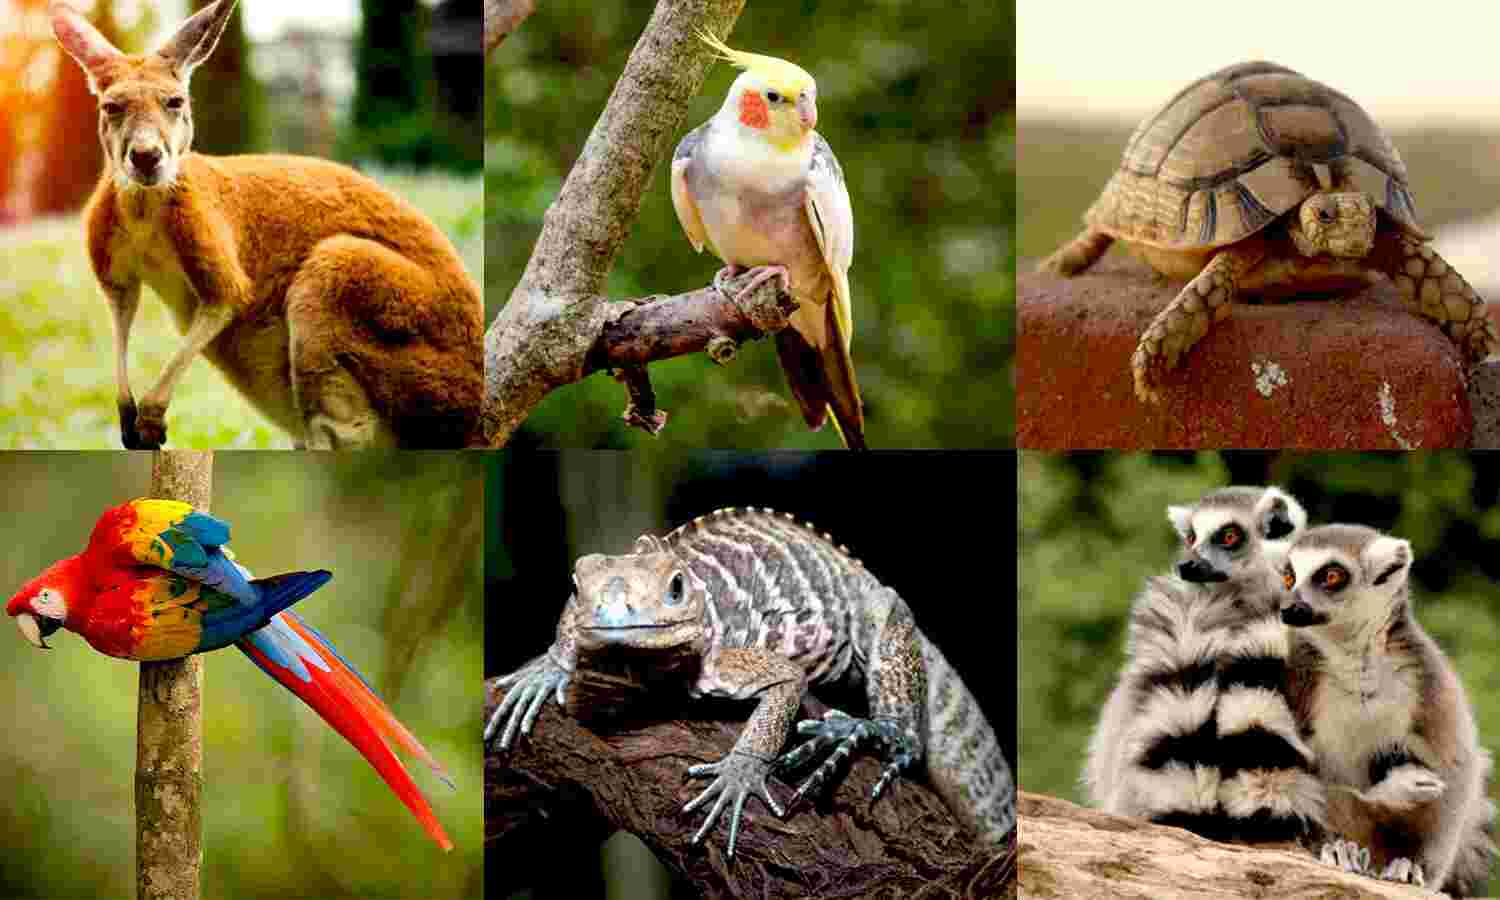 32,000 Indians Say They Possess Exotic Animals In Post-COVID Amnesty